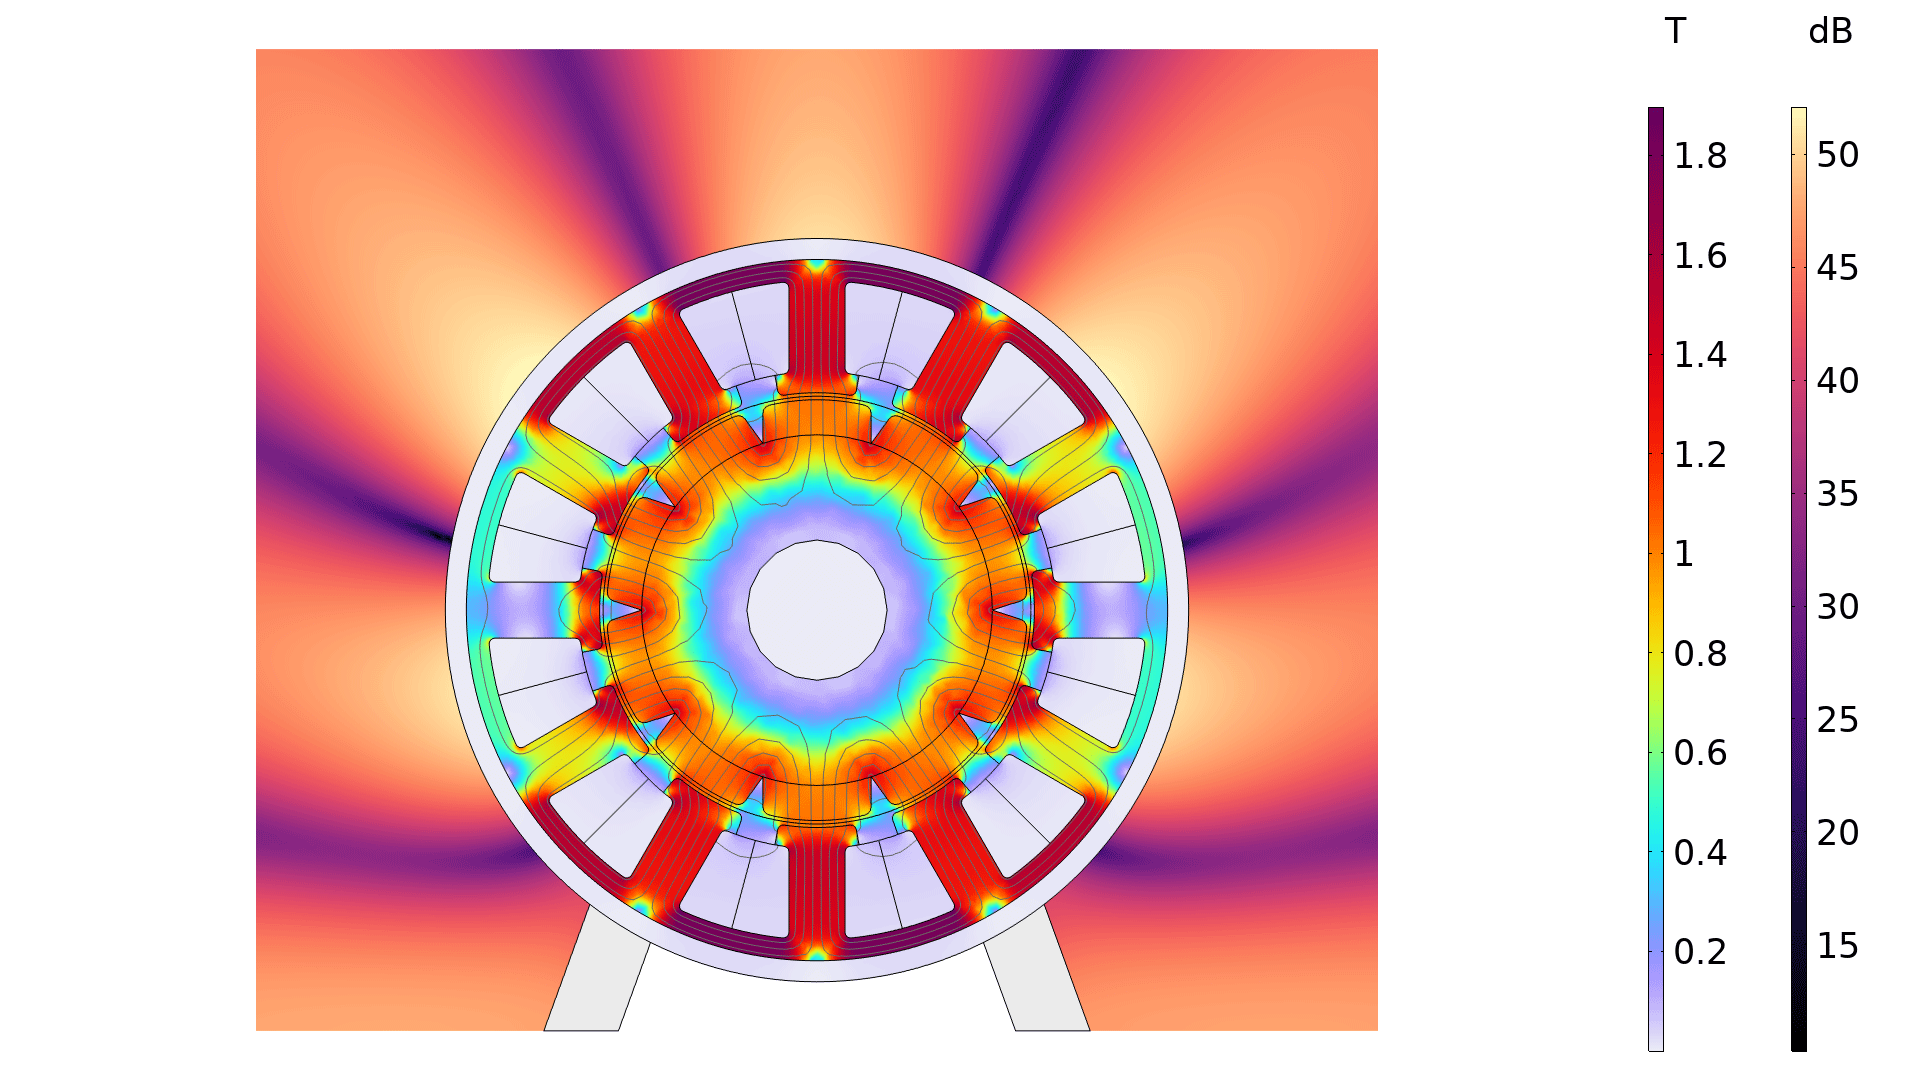 A permanent magnet motor model in the Prism color table.